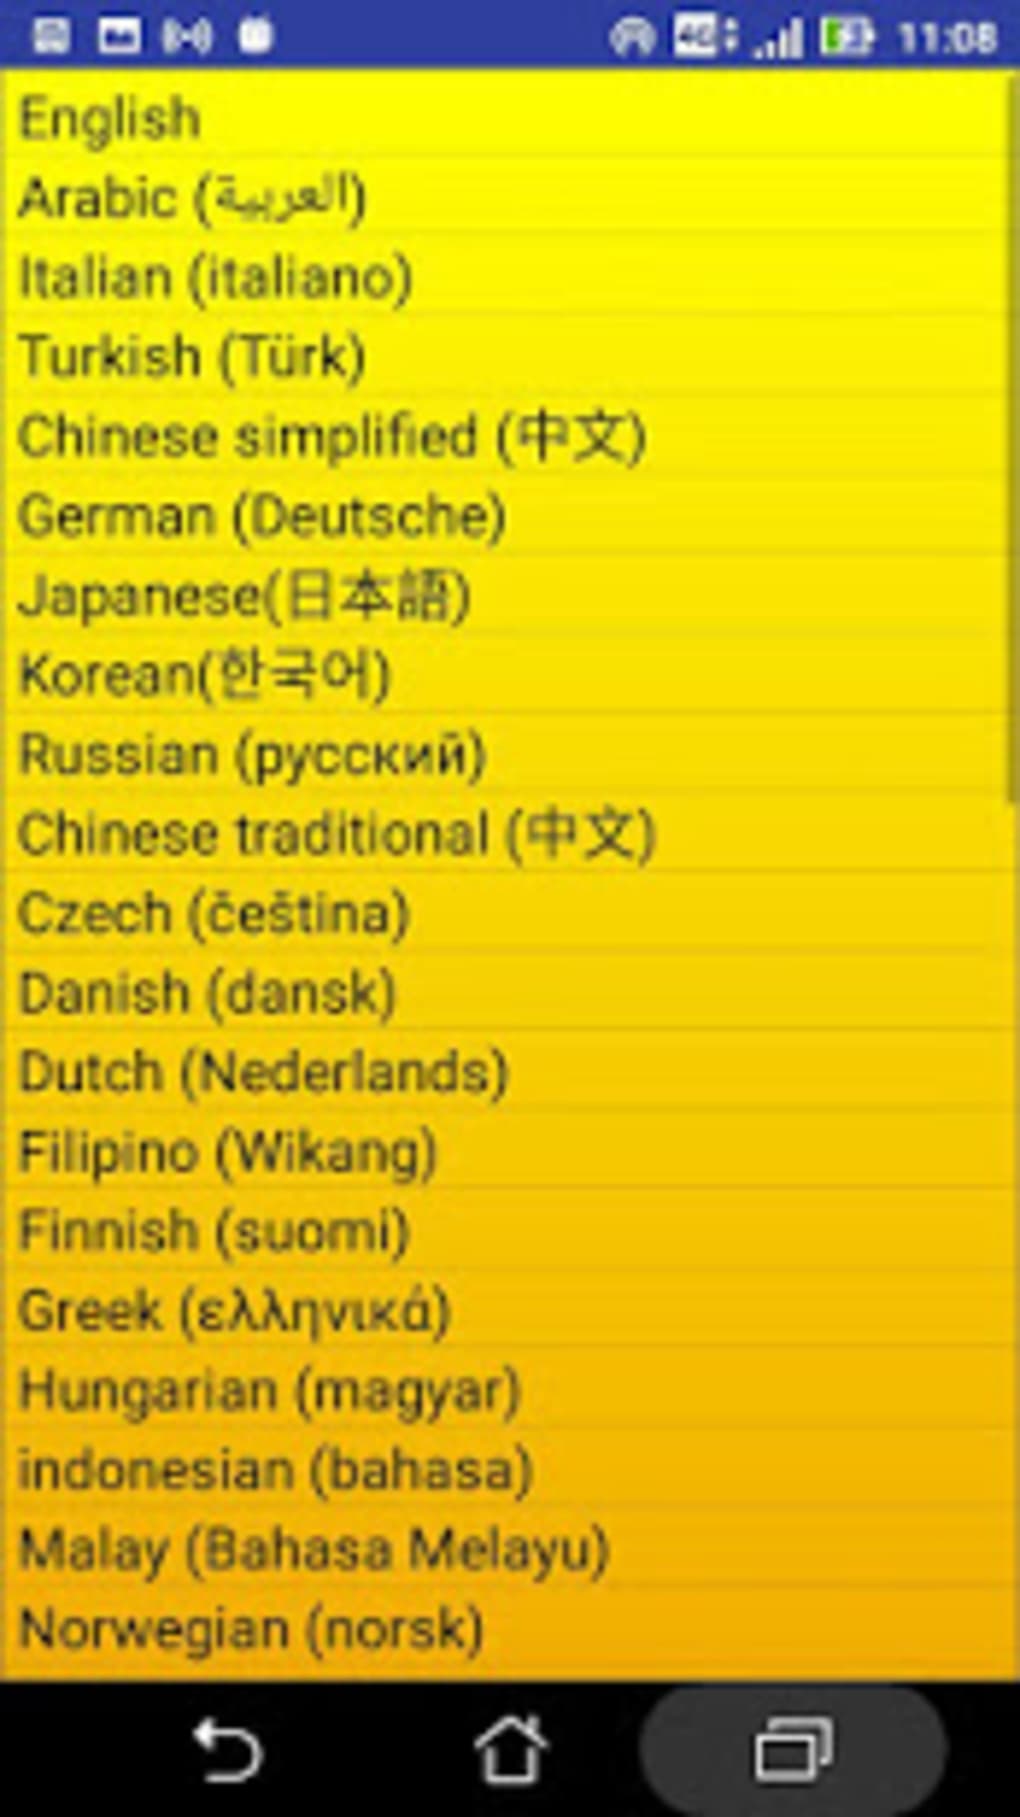 2000-filipino-words-most-used-apk-android